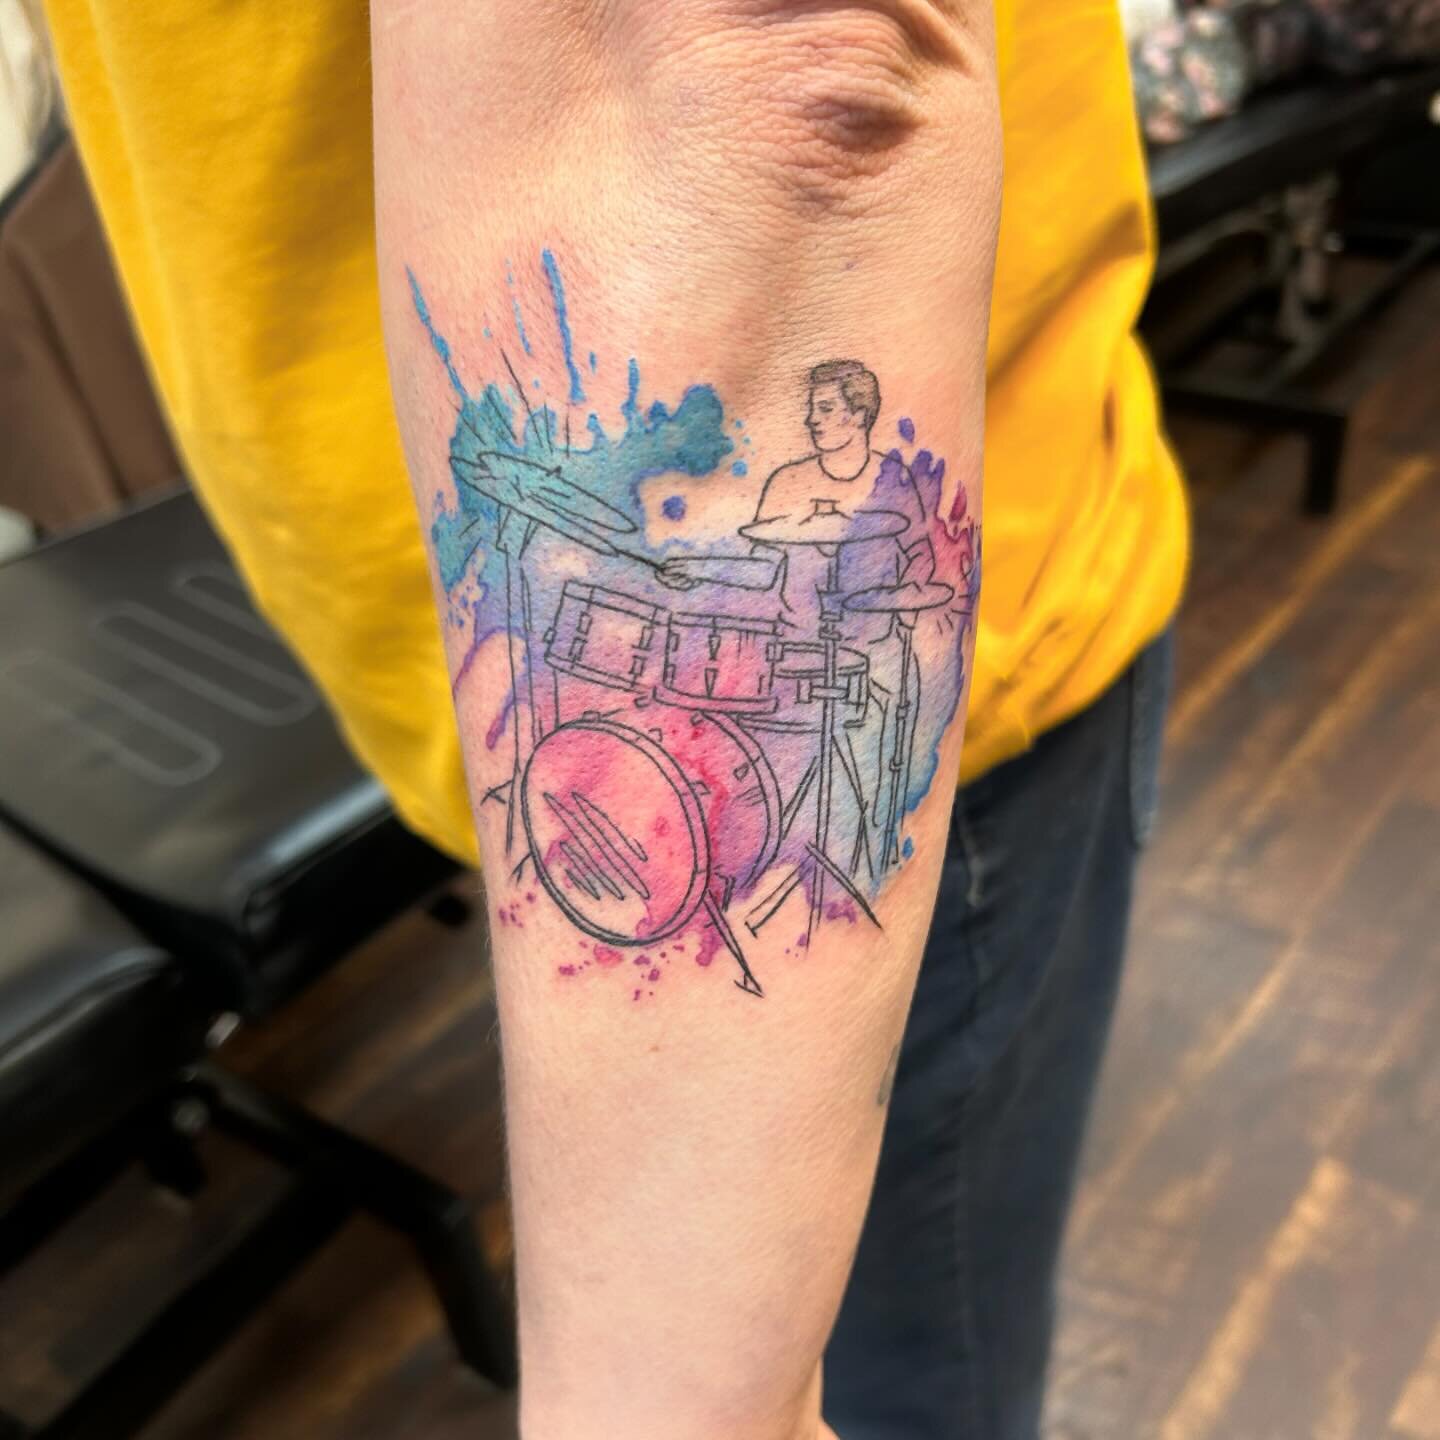 Watercolor drummer 🥁 I always have a lot of fun with watercolor style! Currently booking for May &amp; June ✨
.
.
.
.
.
.
.
#watercolortattoo #tattoo #tattooartist #michigantattooartist #michigantattooers #southeastmichigan #detroittattooartist #ete